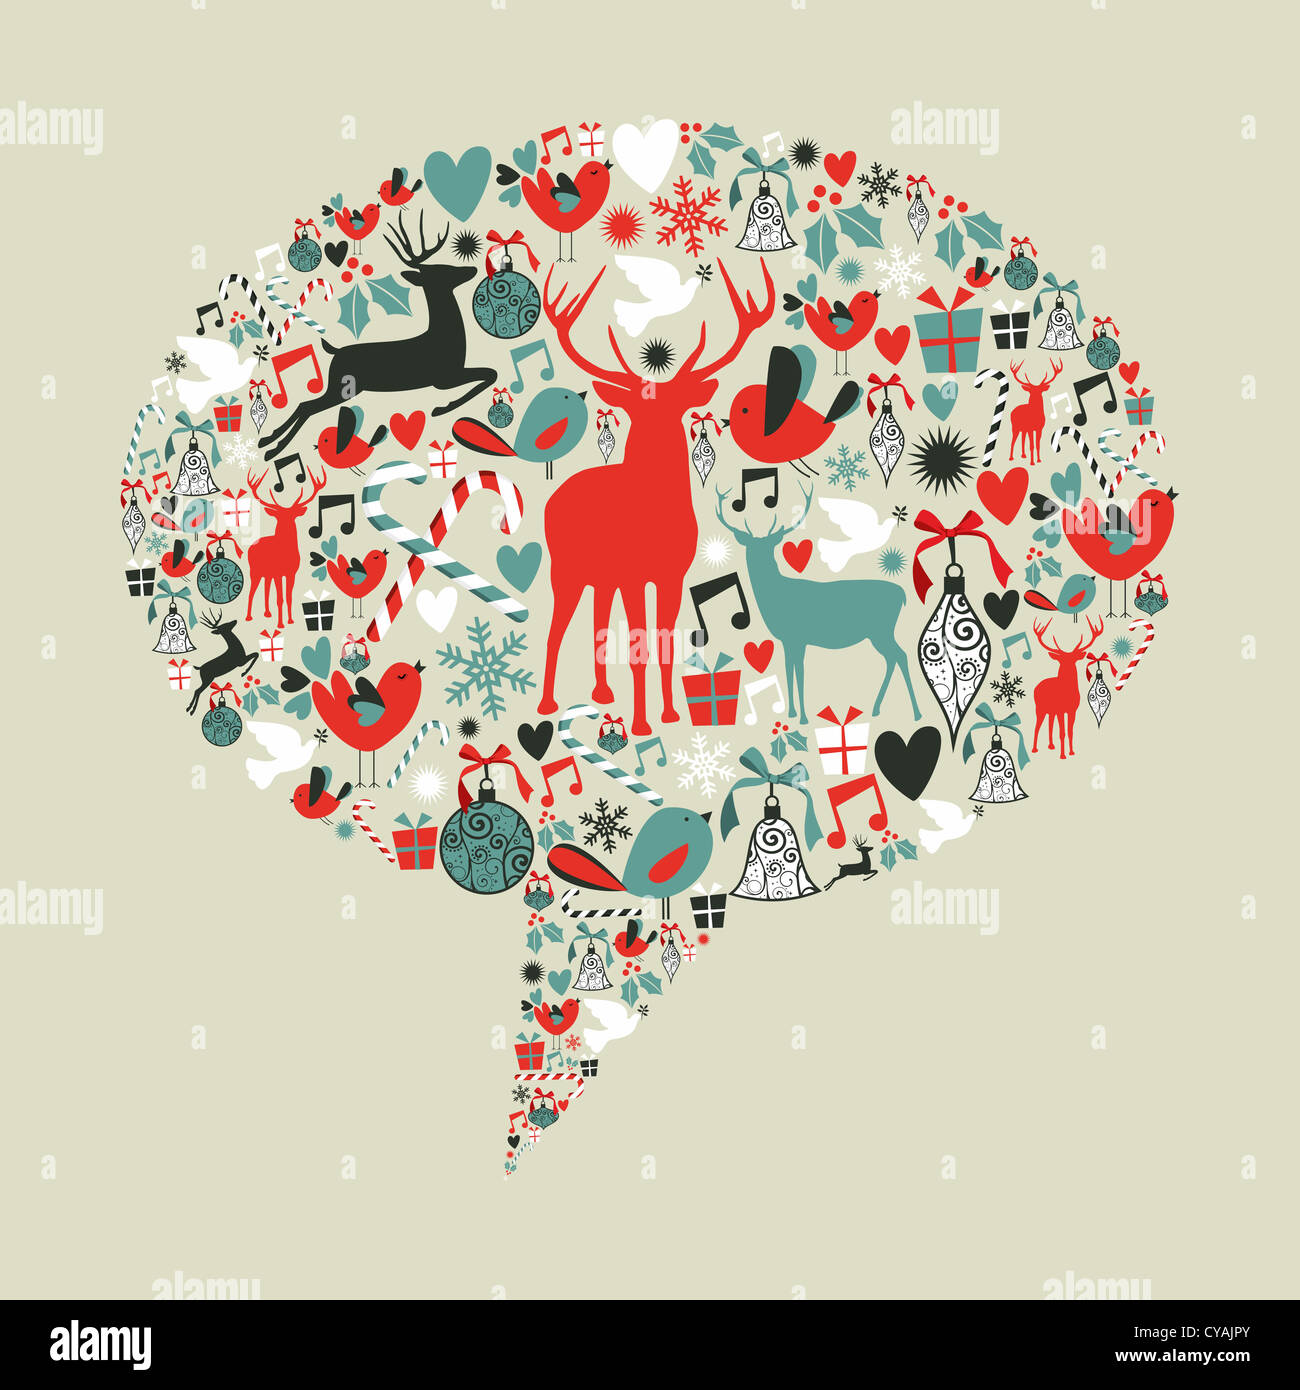 Christmas icons set in social media networks speech bubble. Vector illustration layered for easy manipulation and custom coloring. Stock Photo